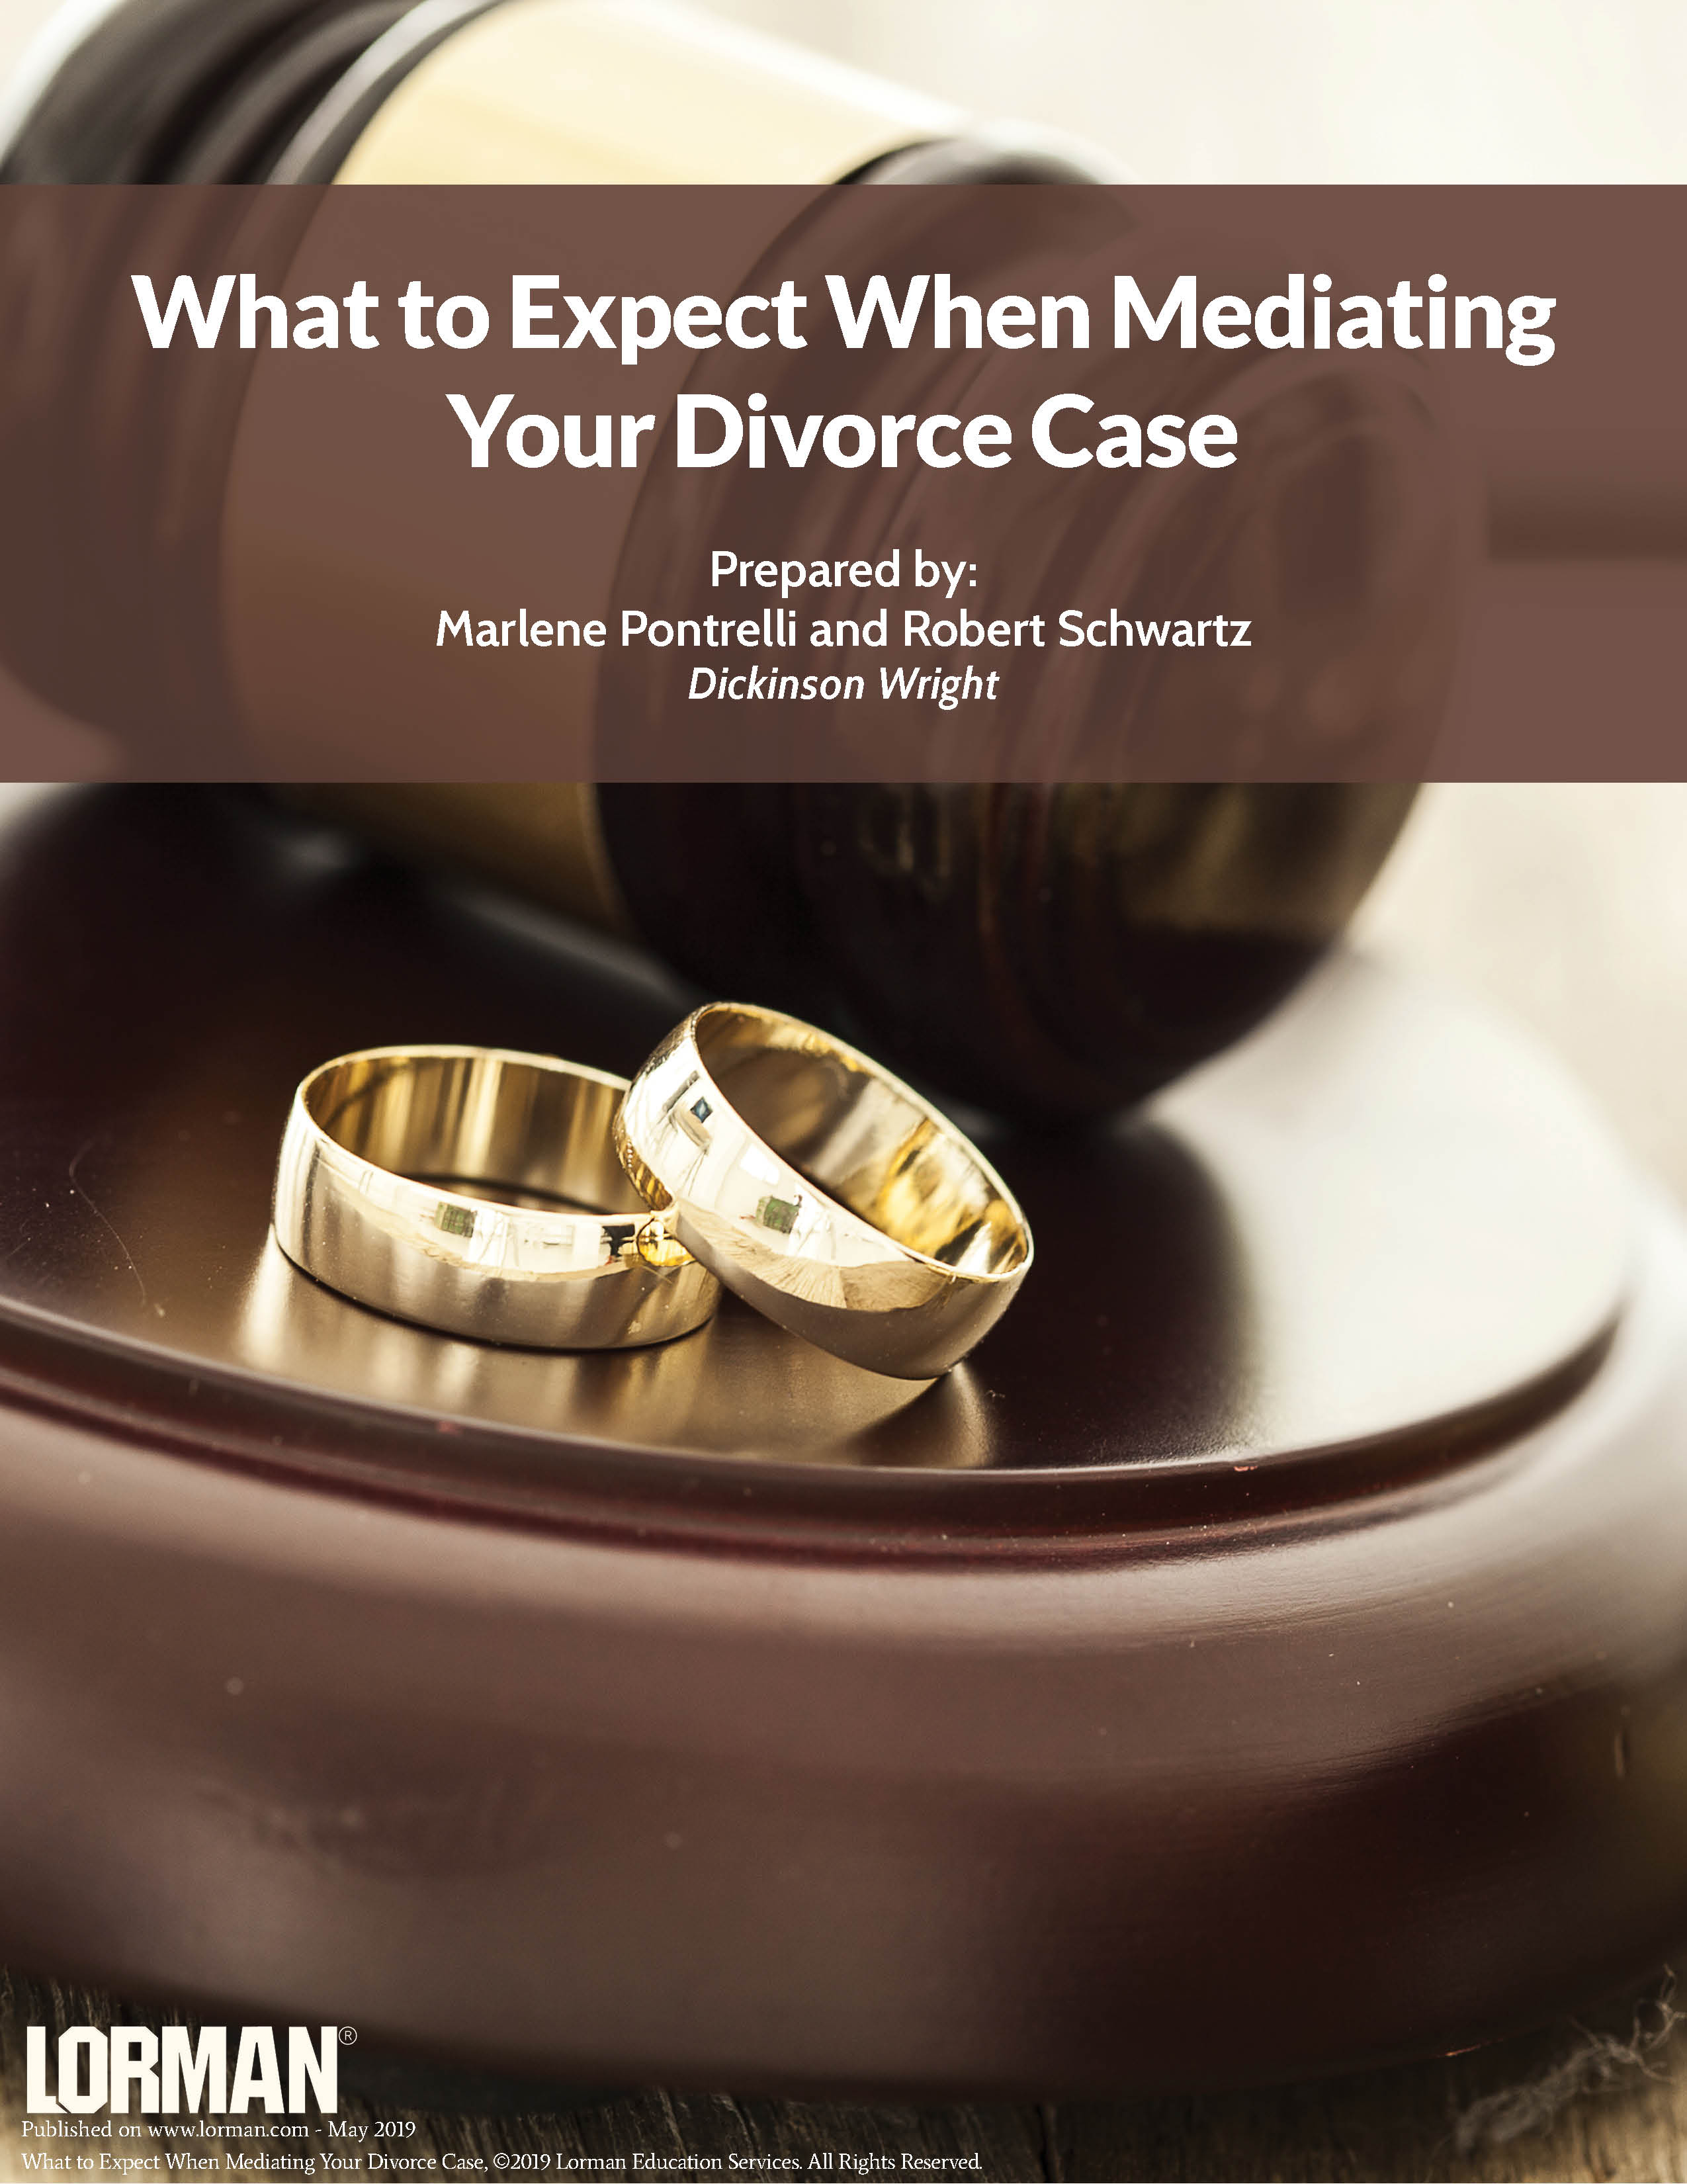 What to Expect When Mediating Your Divorce Case